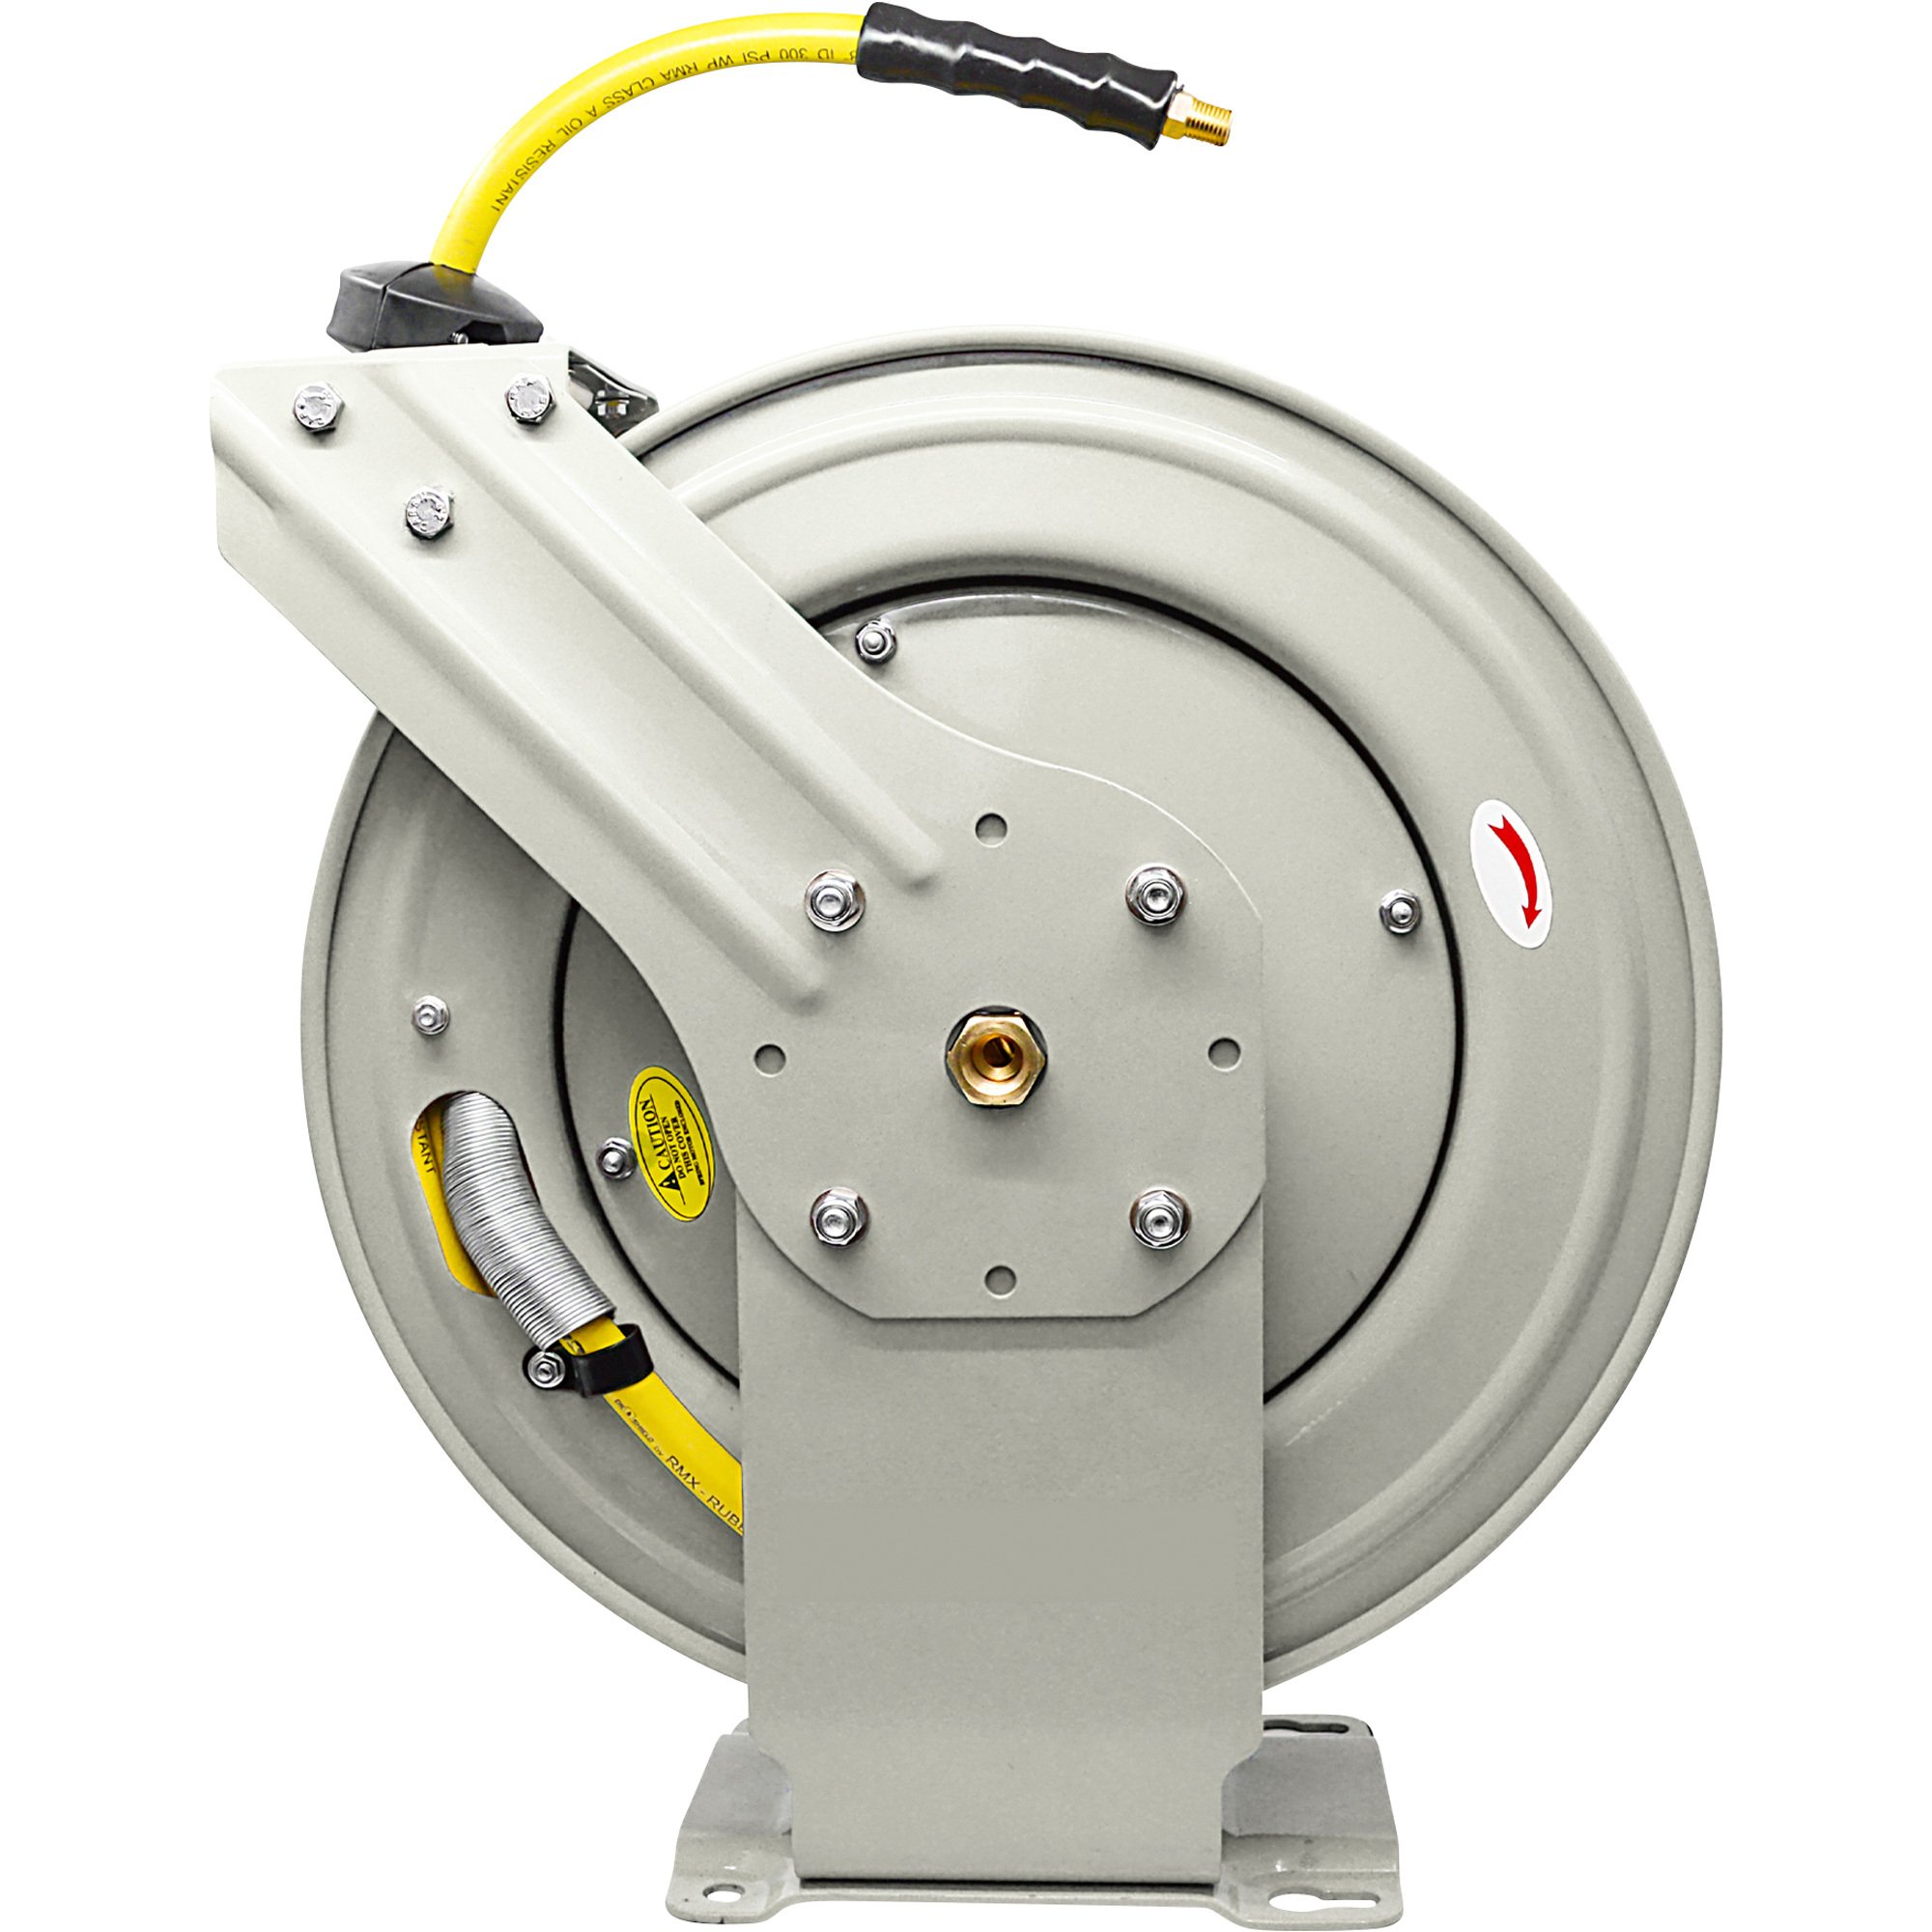 Klutch Auto-Rewind Dual Arm Air Hose Reel, with 3/8in. x 50ft